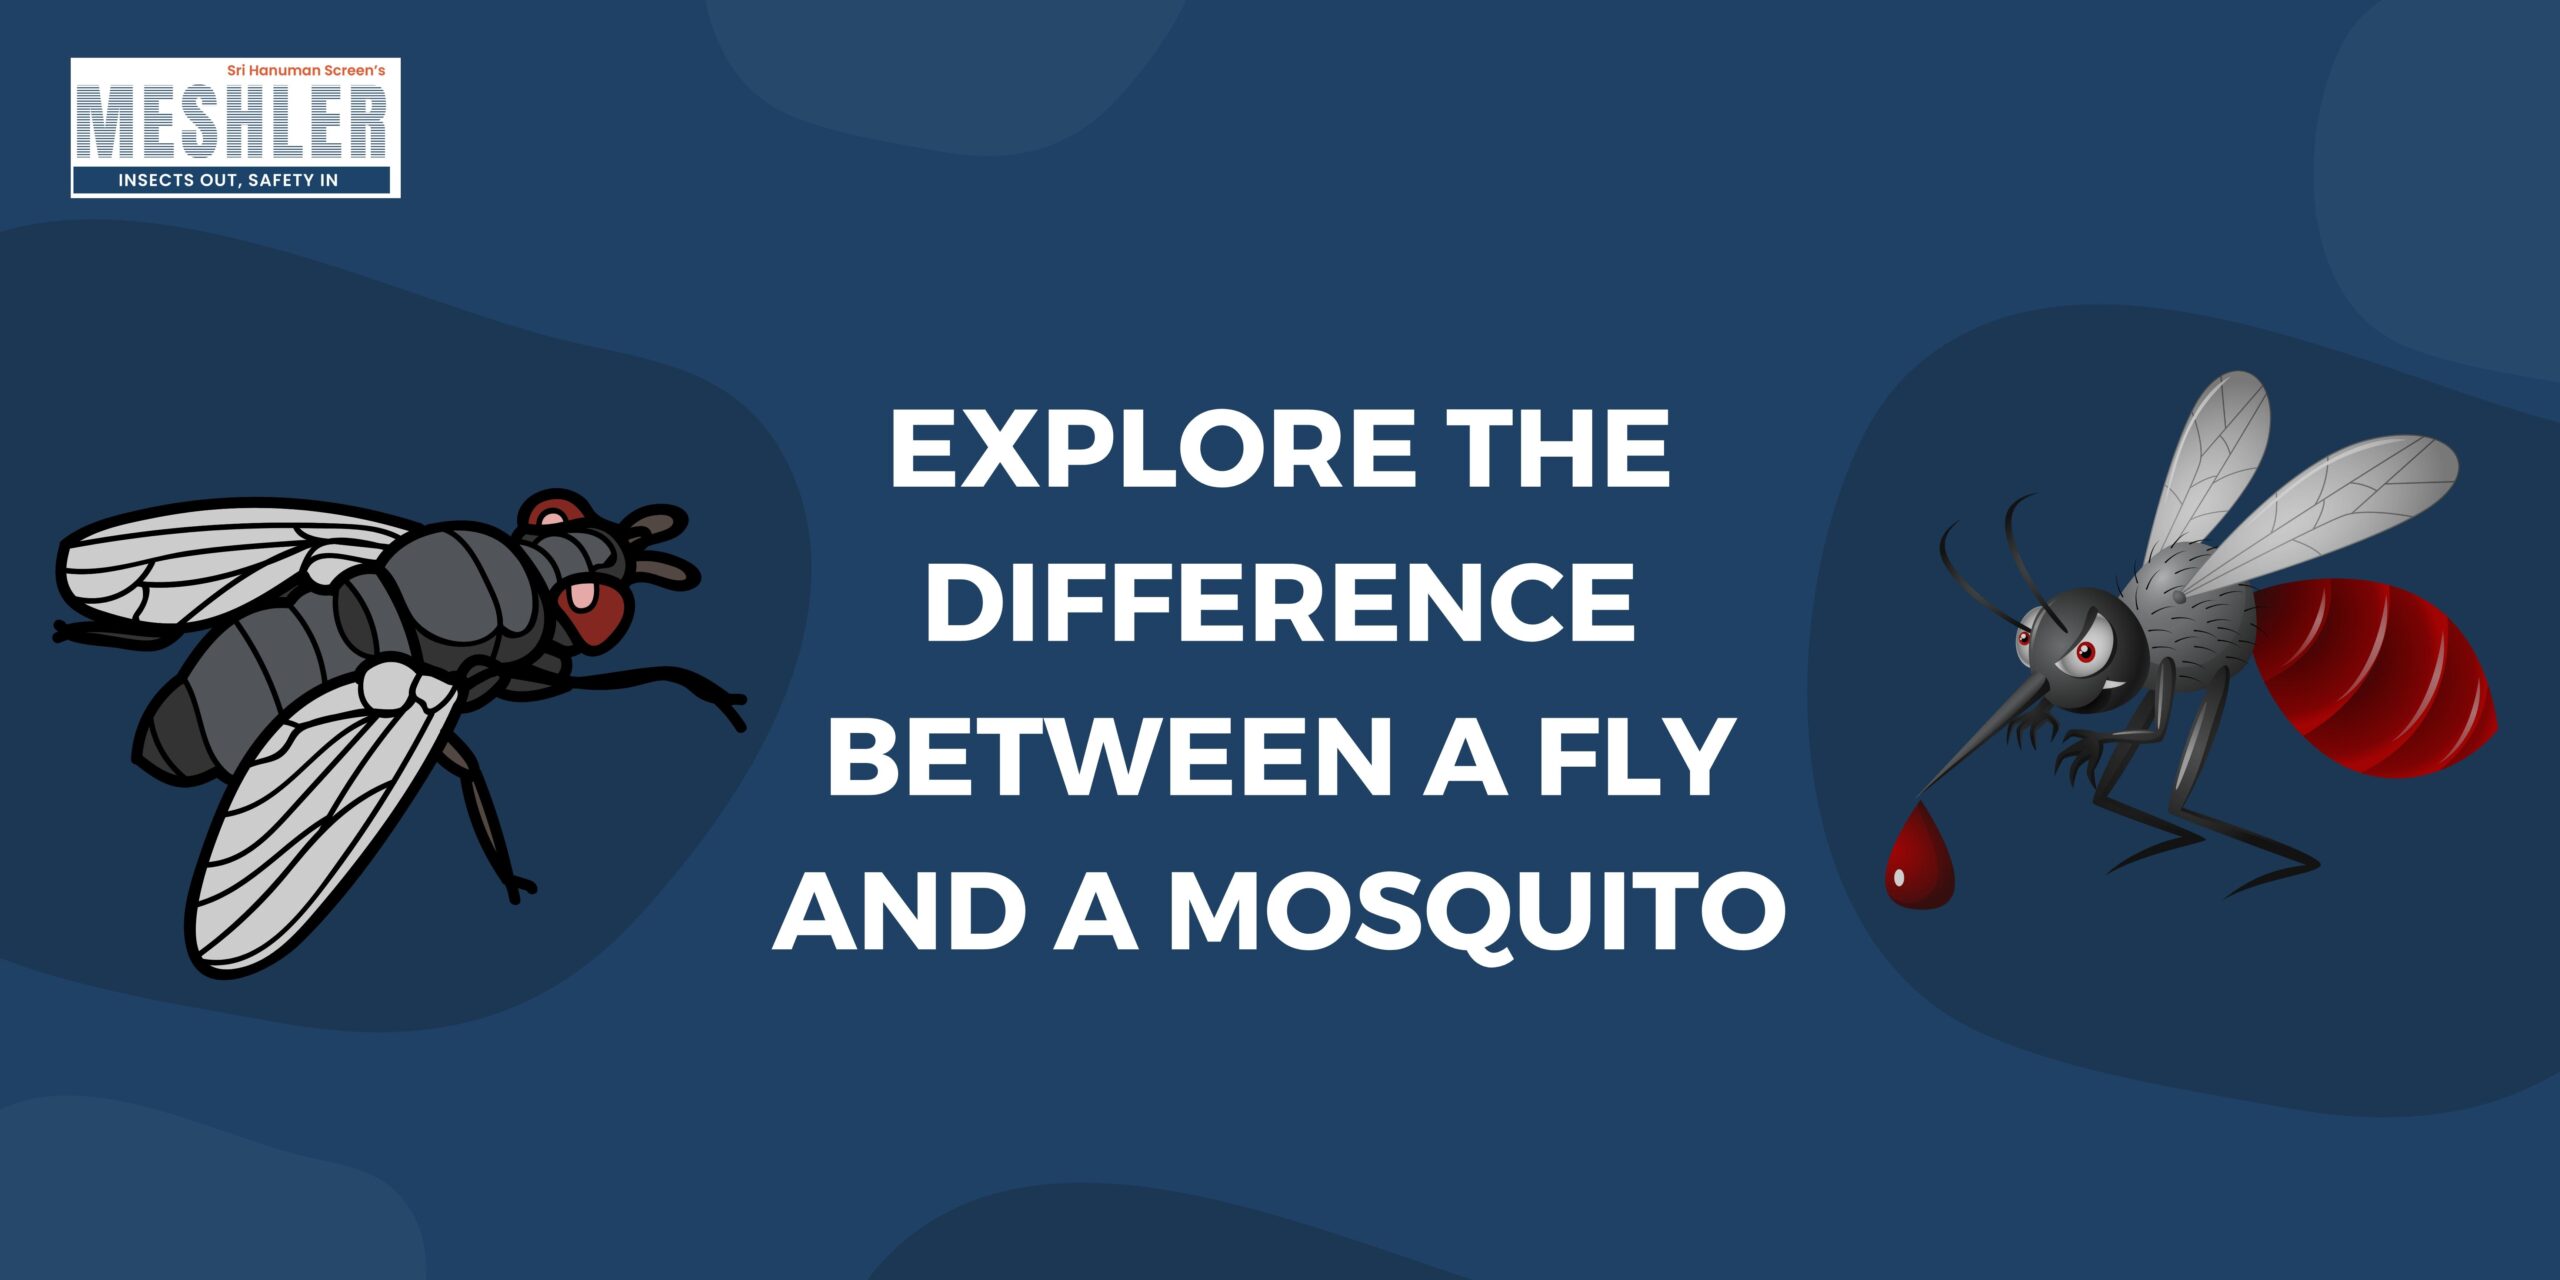 Explore the difference between a fly and a mosquito